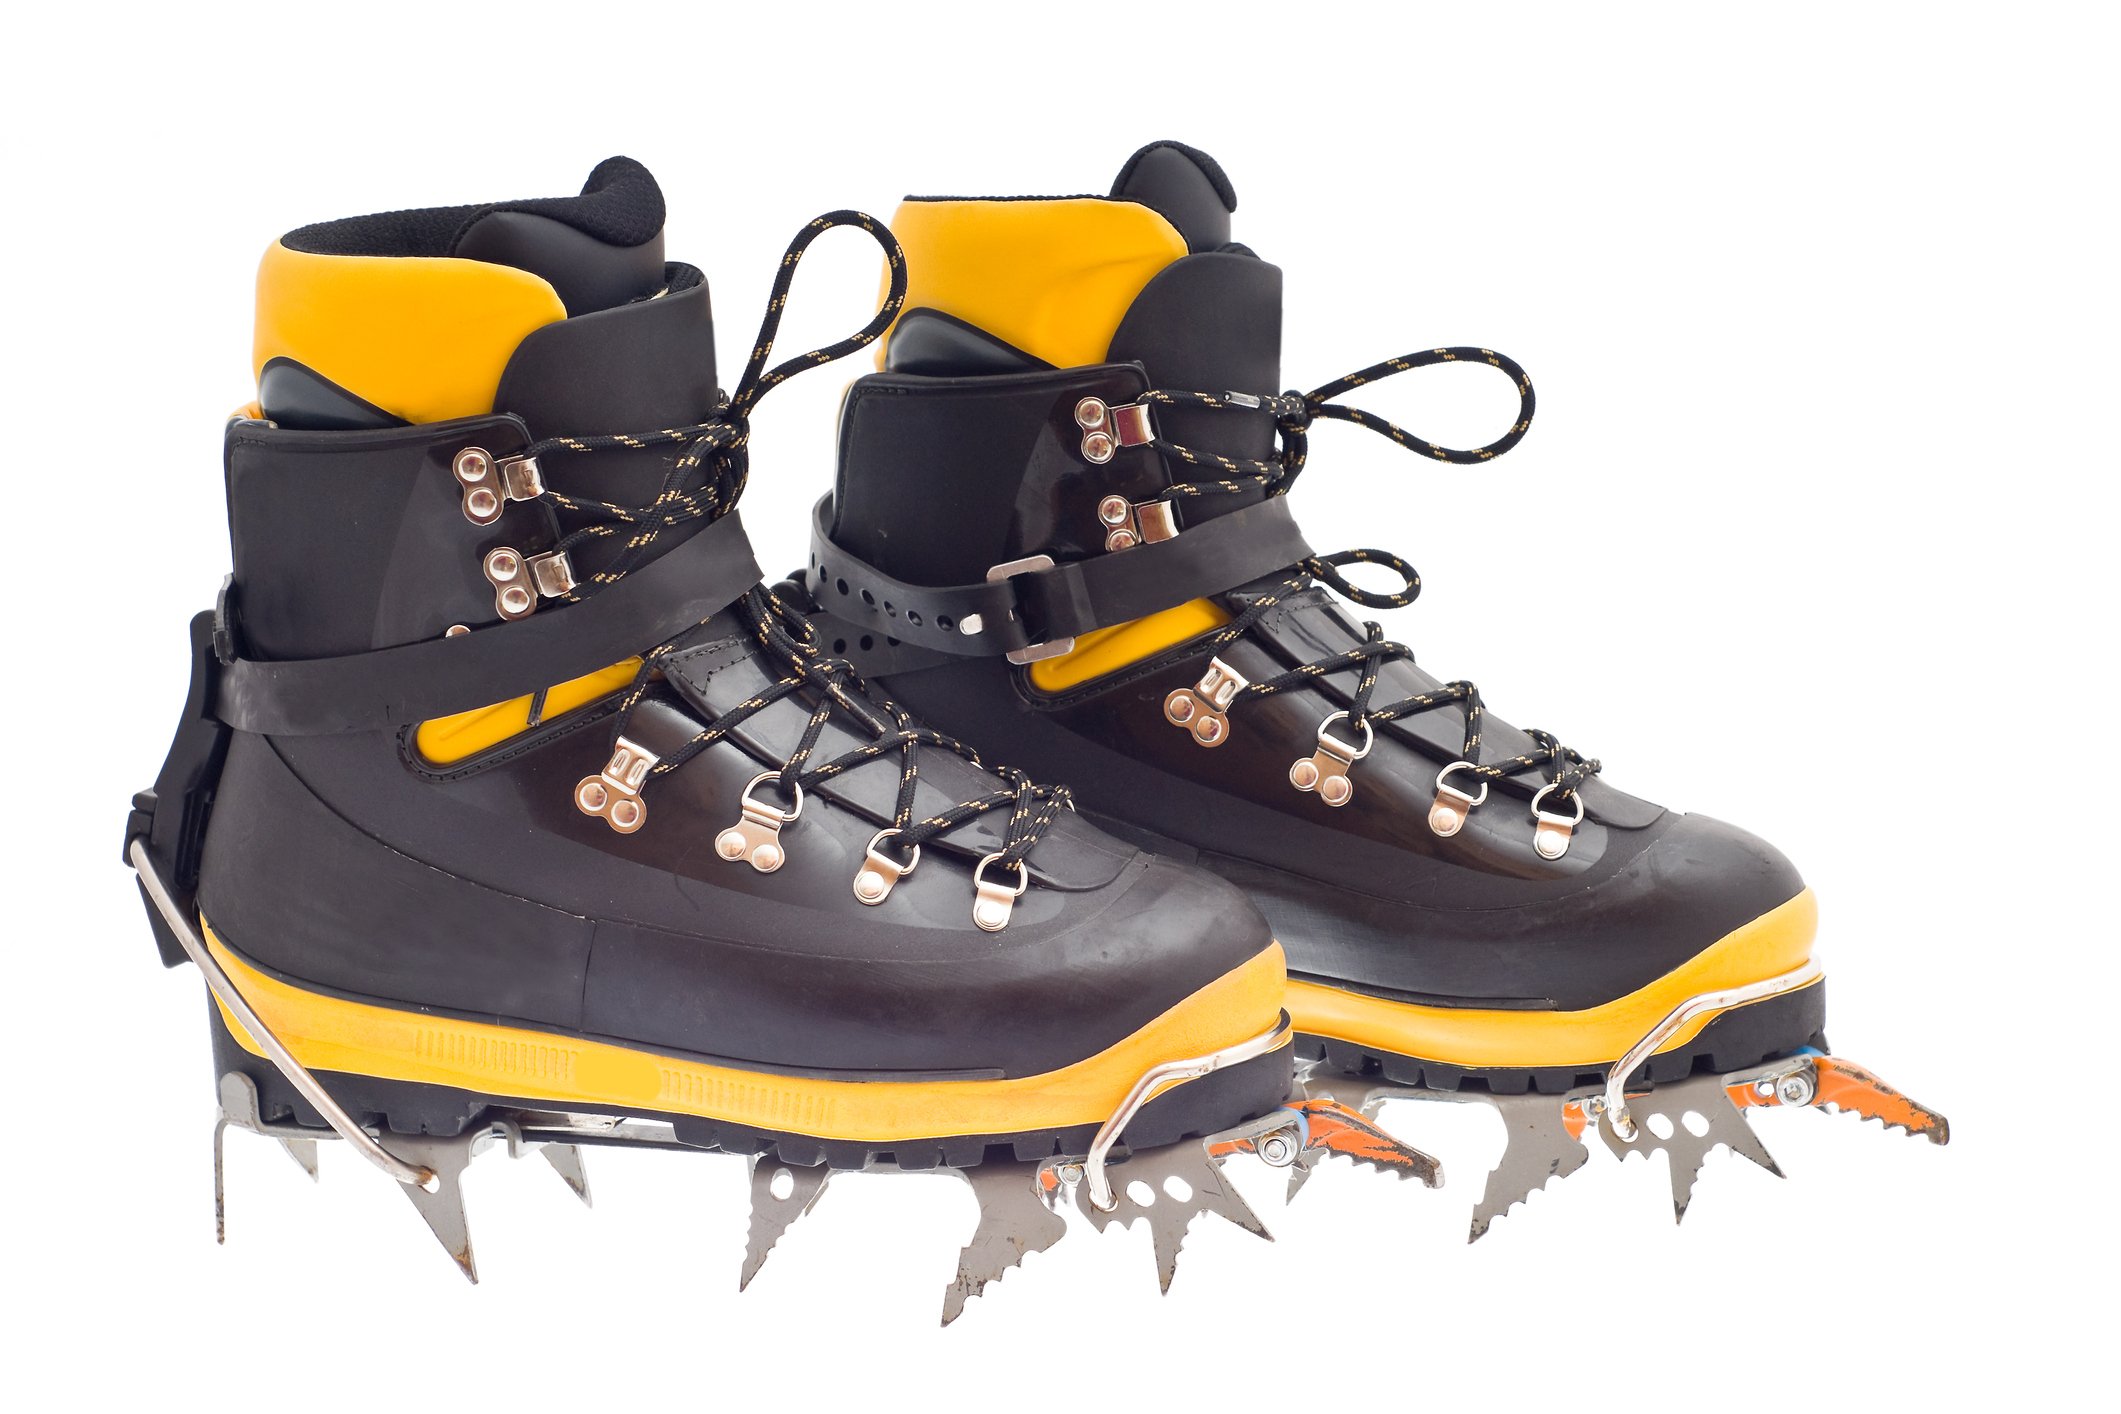 Crampons: Everything you need to Know 